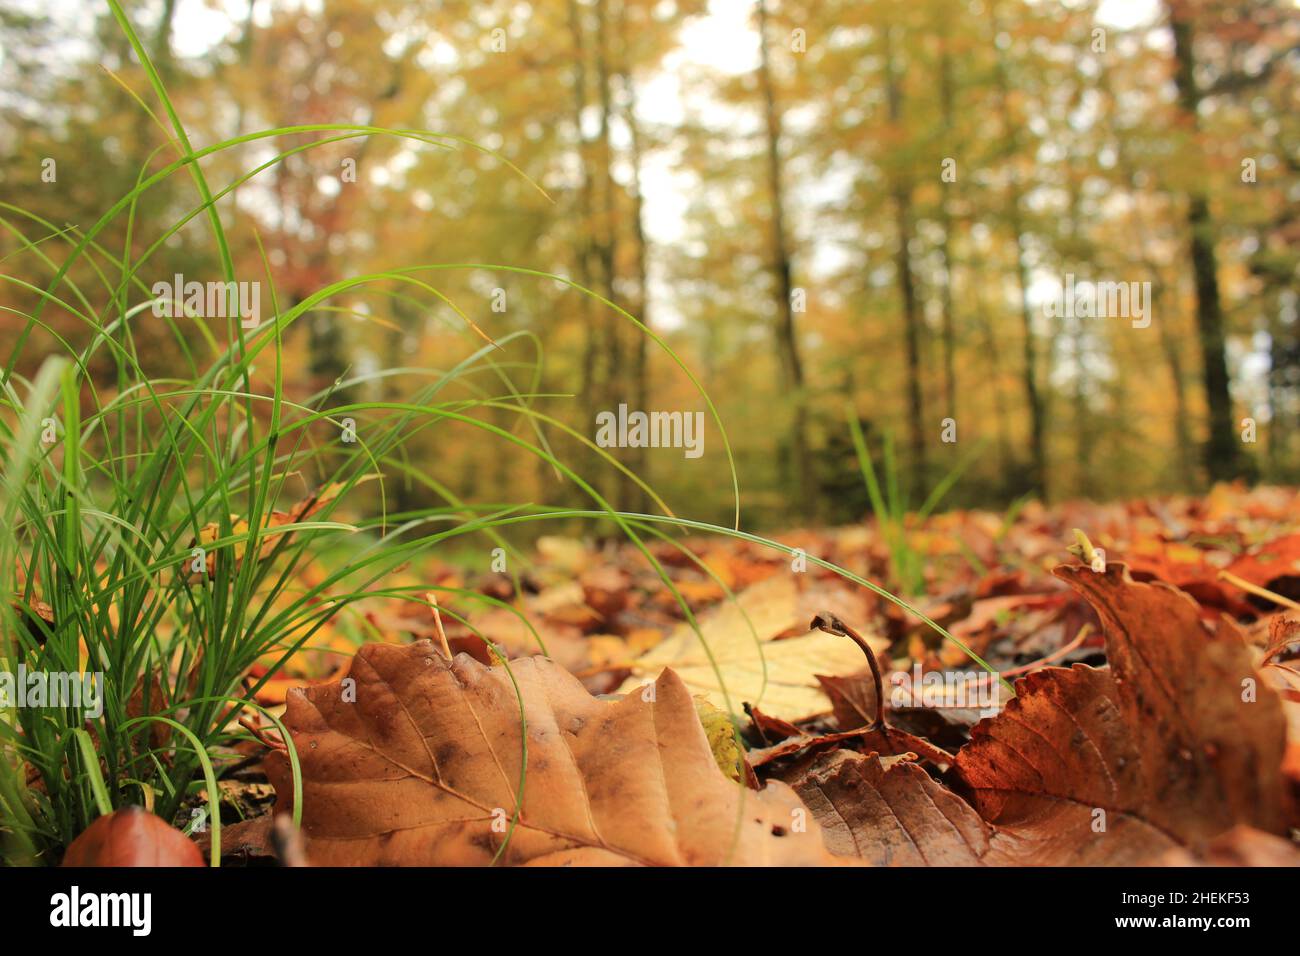 New grass growth among fallen autumn leaves. Nature background revival concept Stock Photo